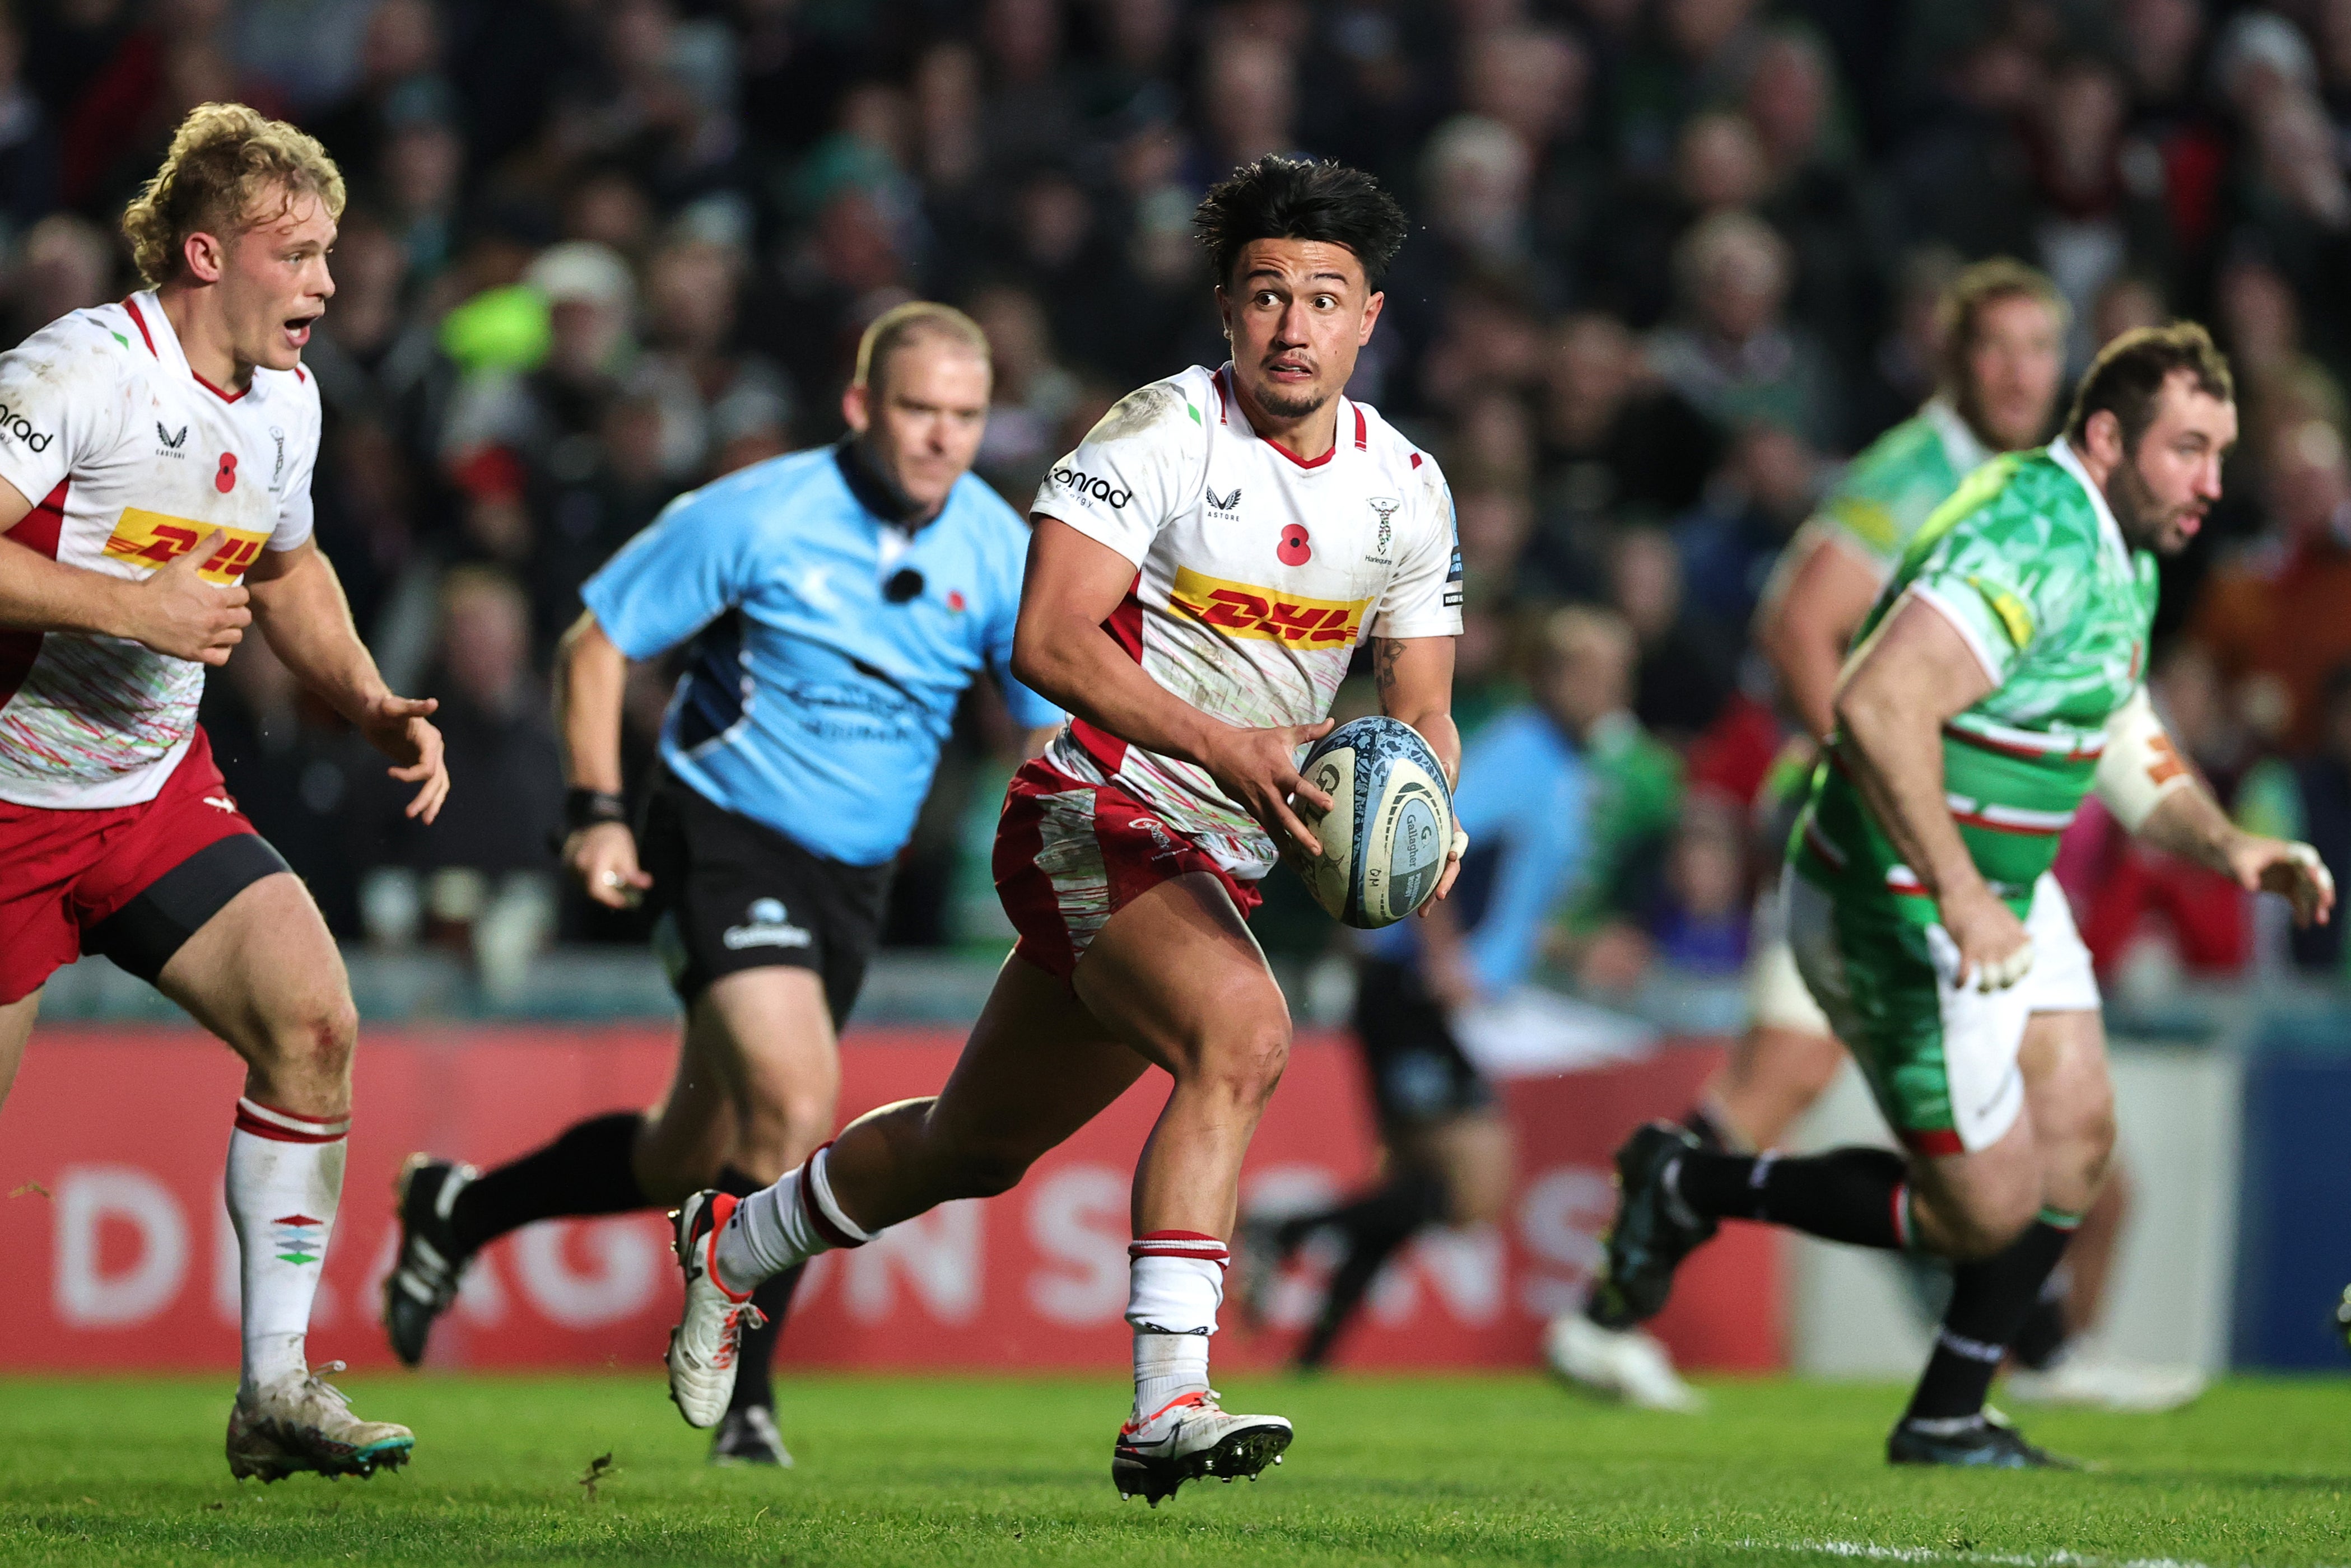 Marcus Smith led Harlequins to a win over Leicester as the London club went top of the Premiership